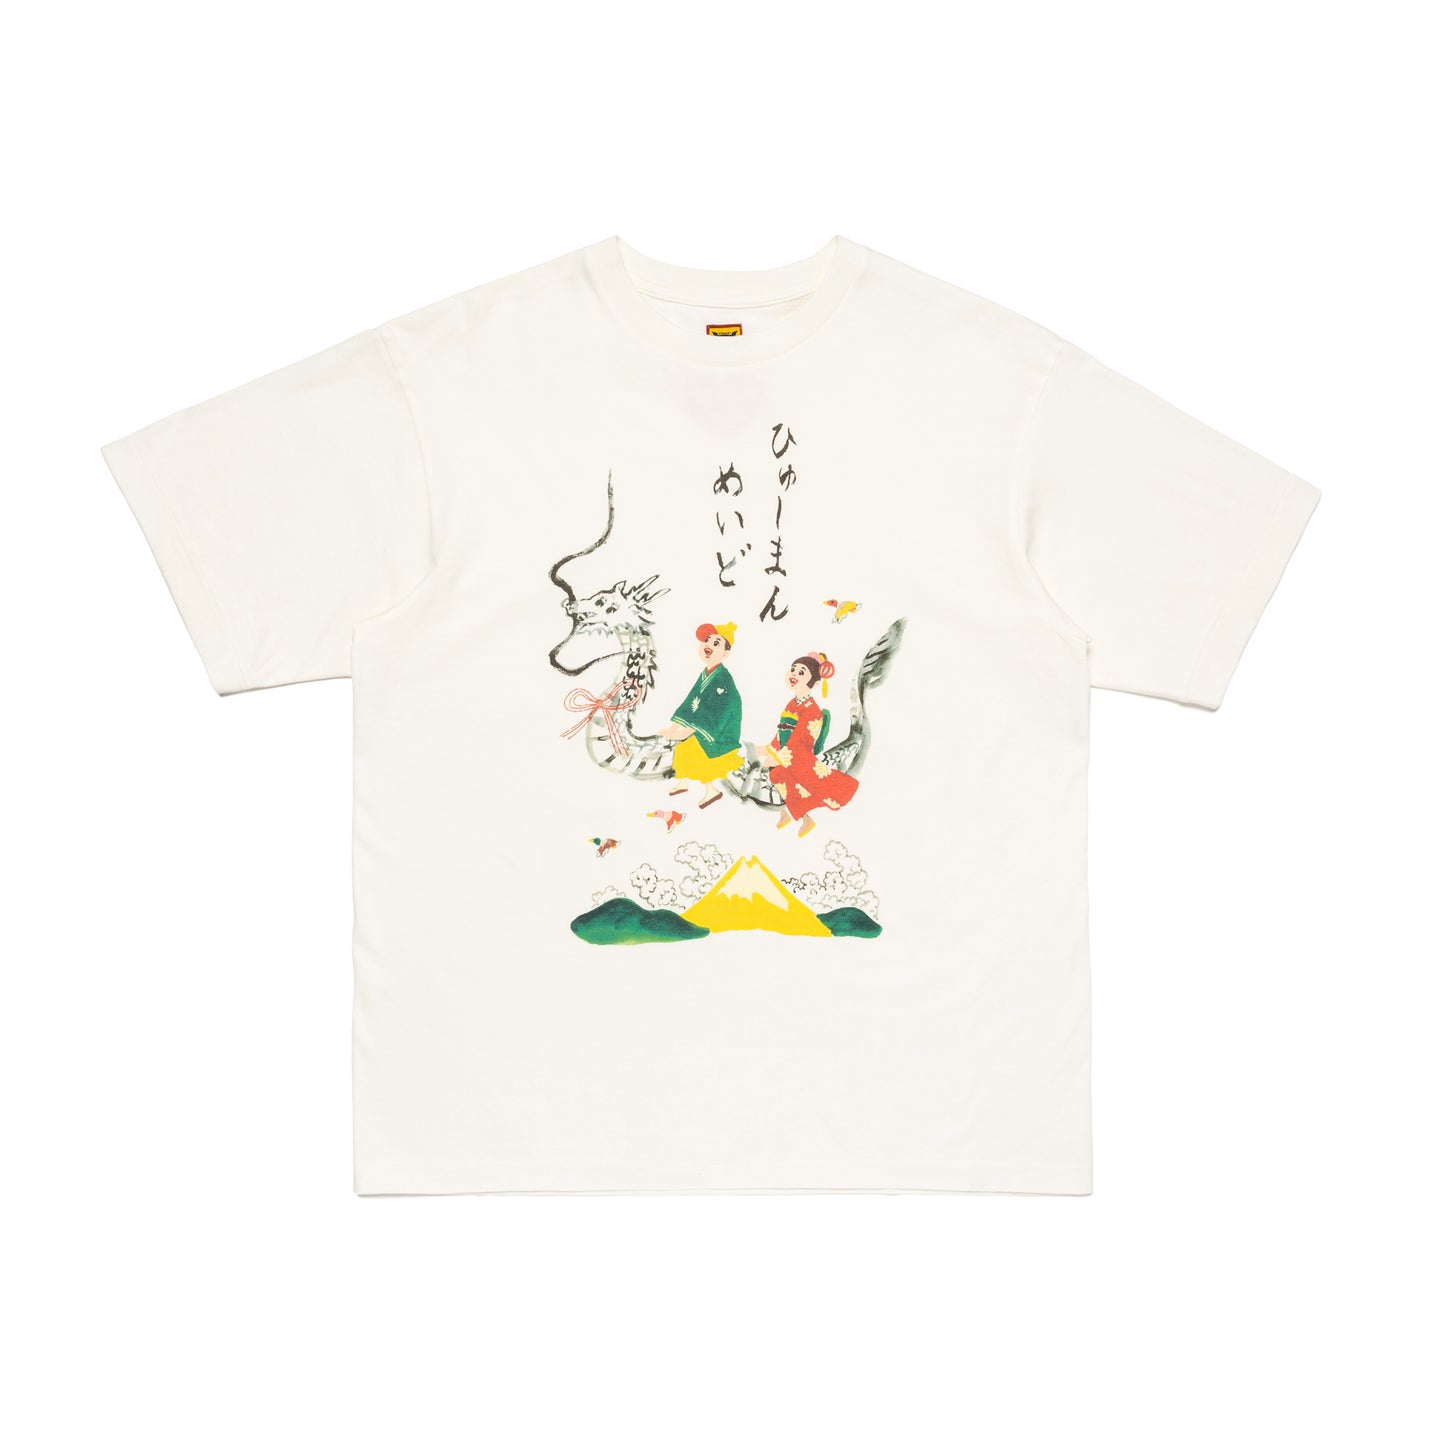 KEIKO SOOTOME T-SHIRT #16 – HUMAN MADE ONLINE STORE